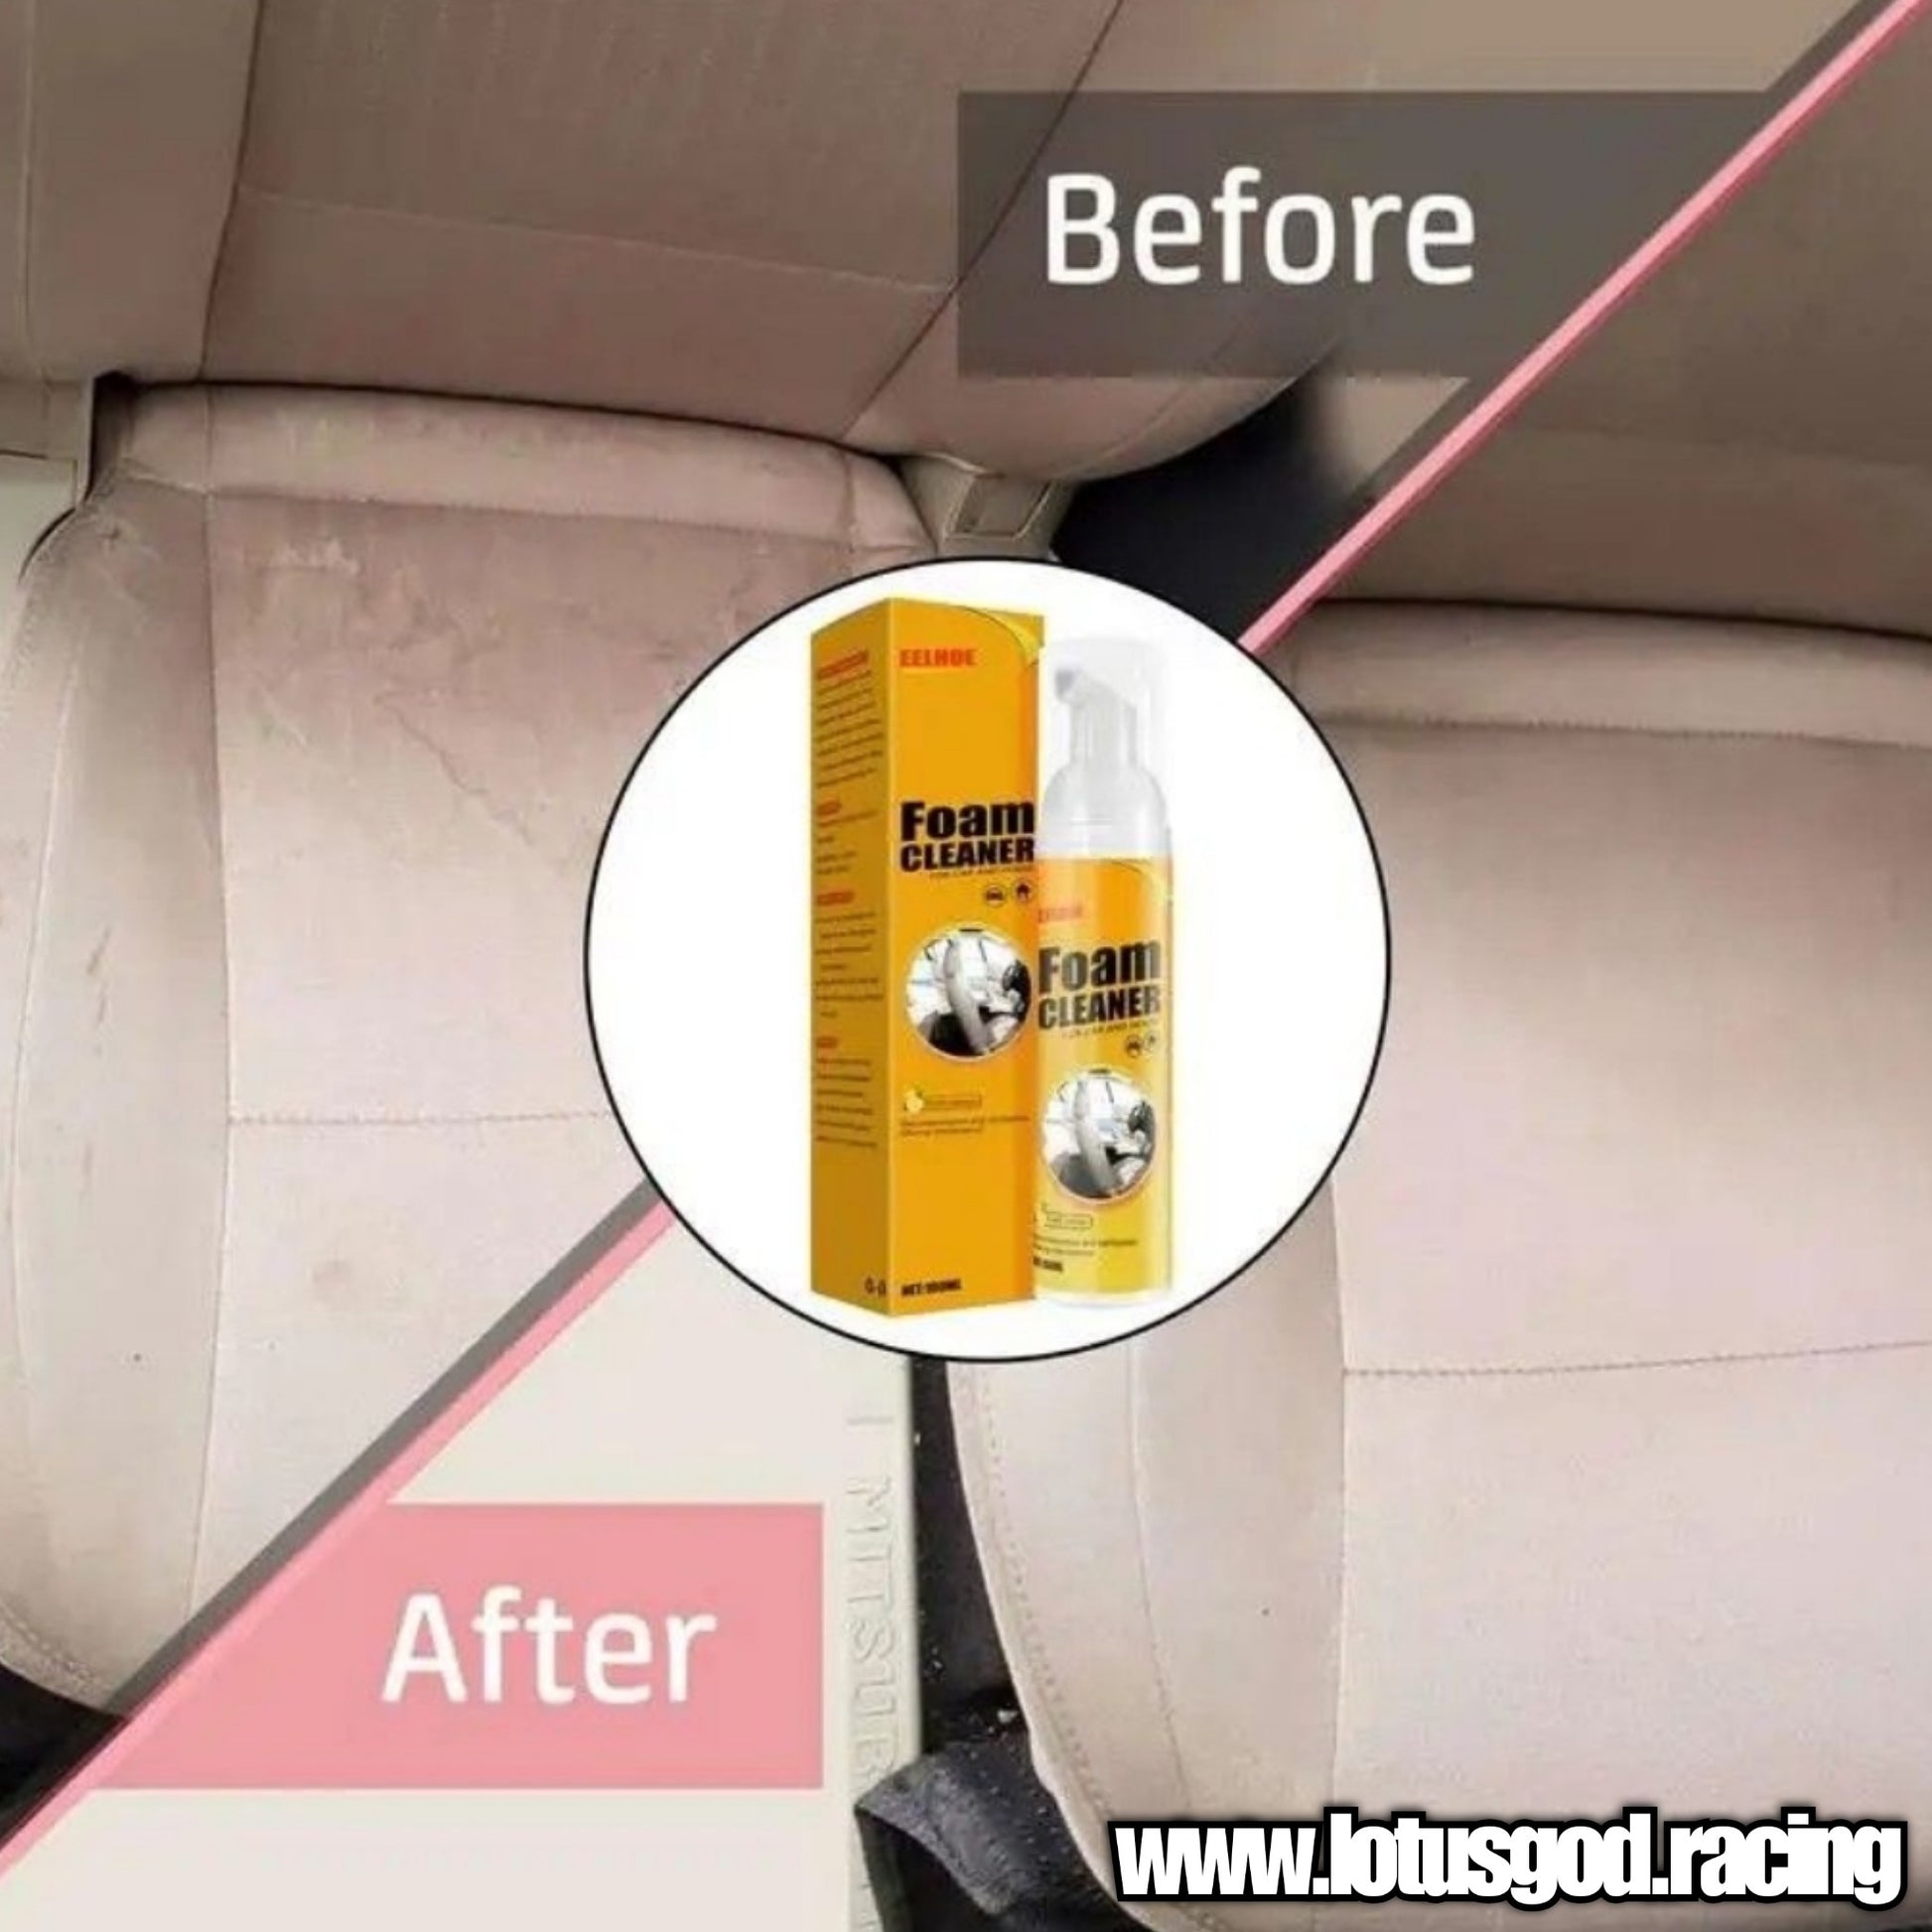 Multipurpose Foam Cleaner Spray - Foam Cleaner for Car and House